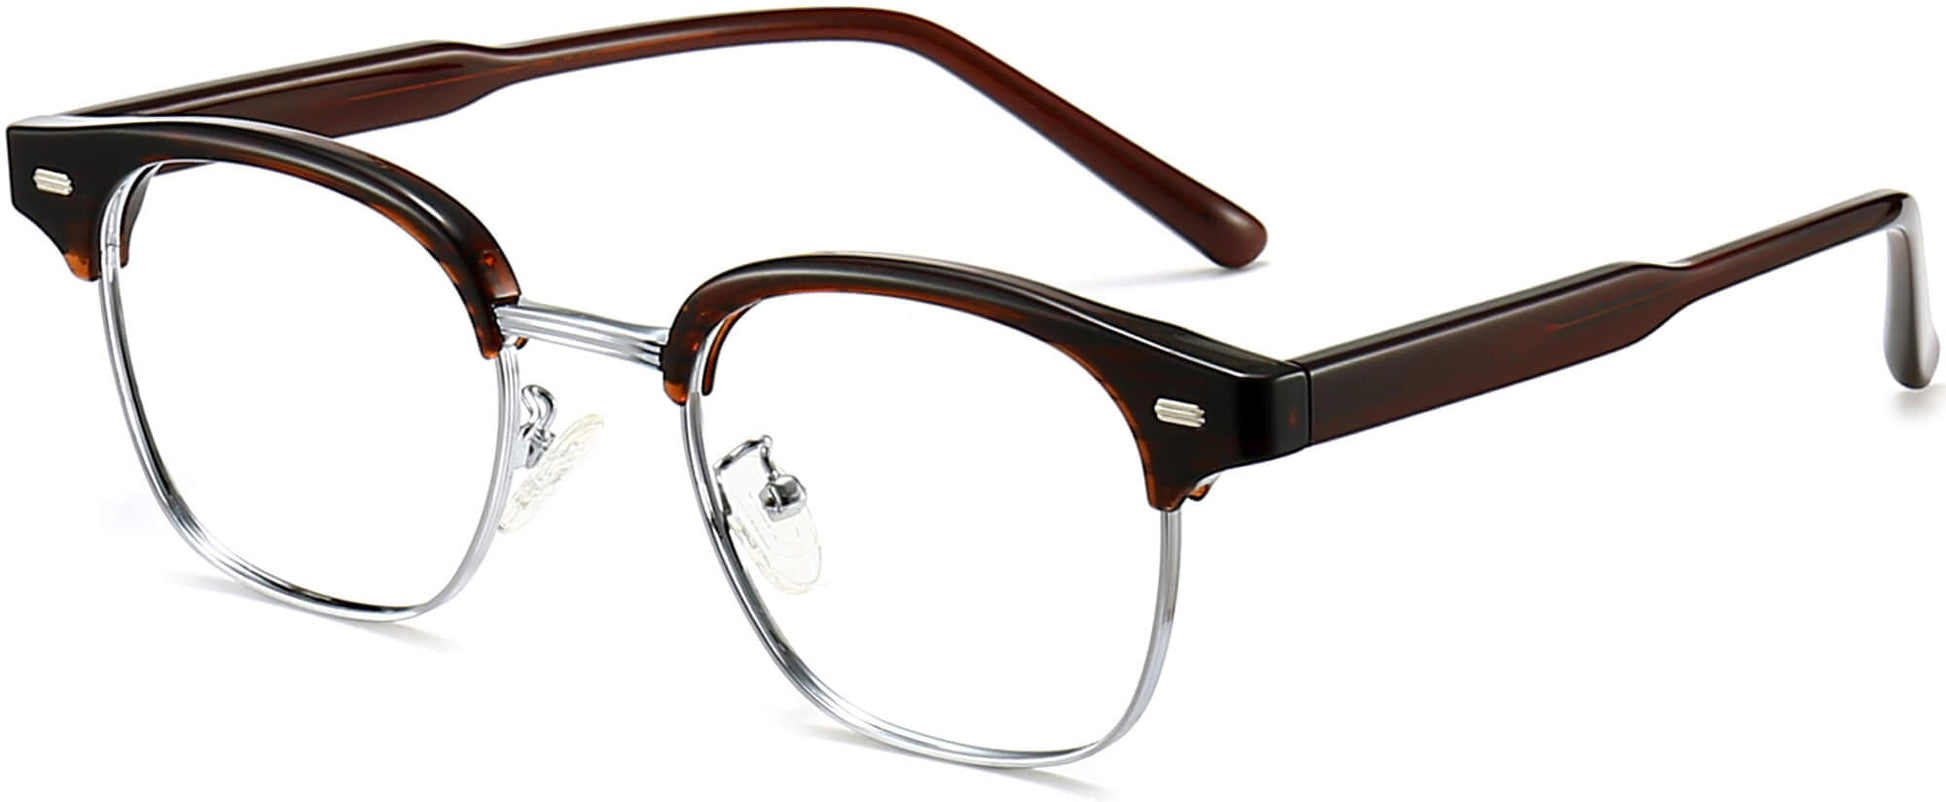 Boston Browline Brown Eyeglasses from ANRRI, angle view